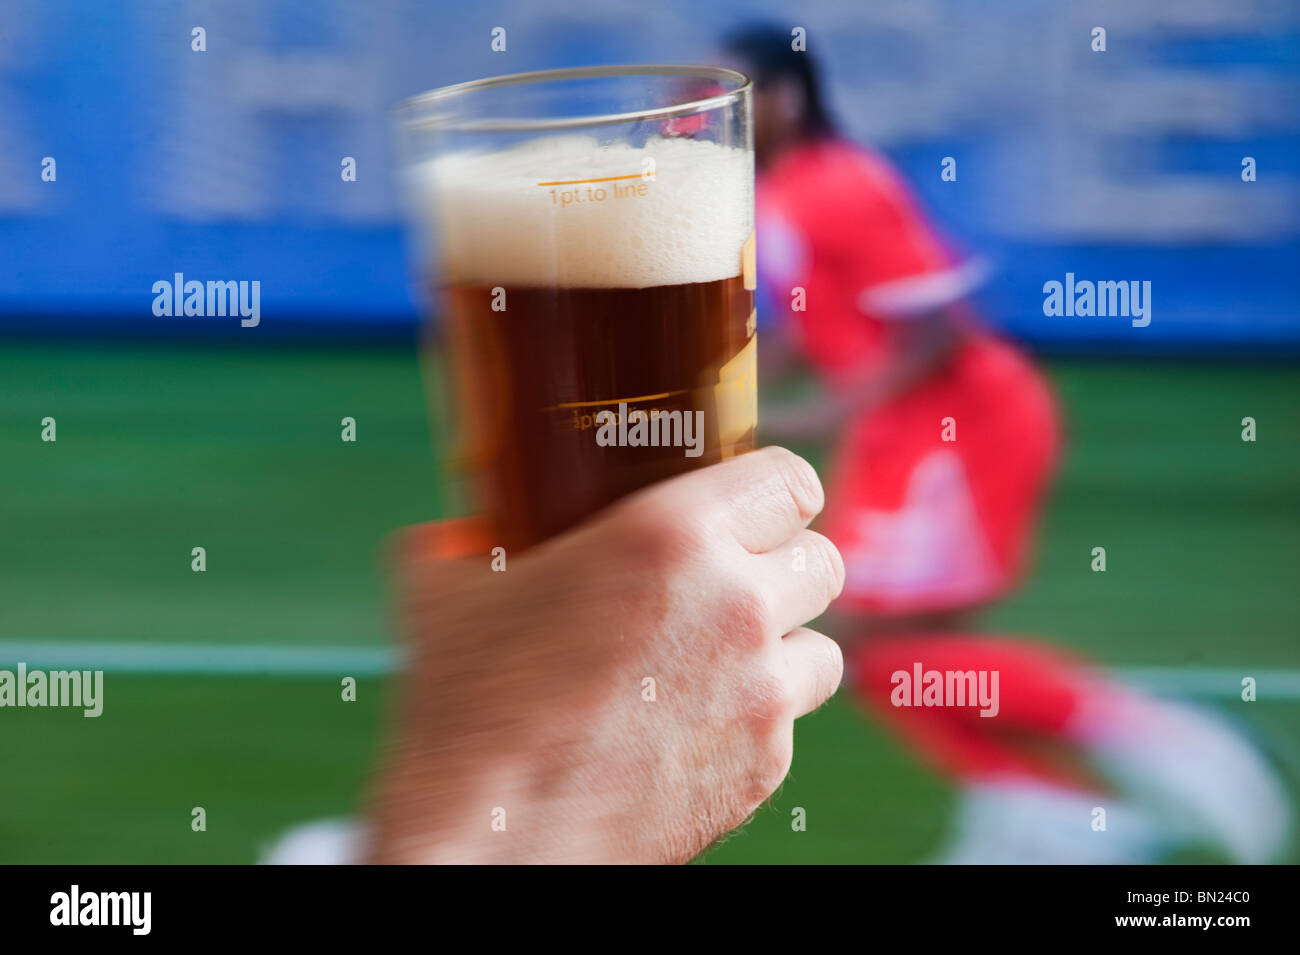 Watching world cup football match on pub tv screen with pint glass of beer in foreground Stock Photo